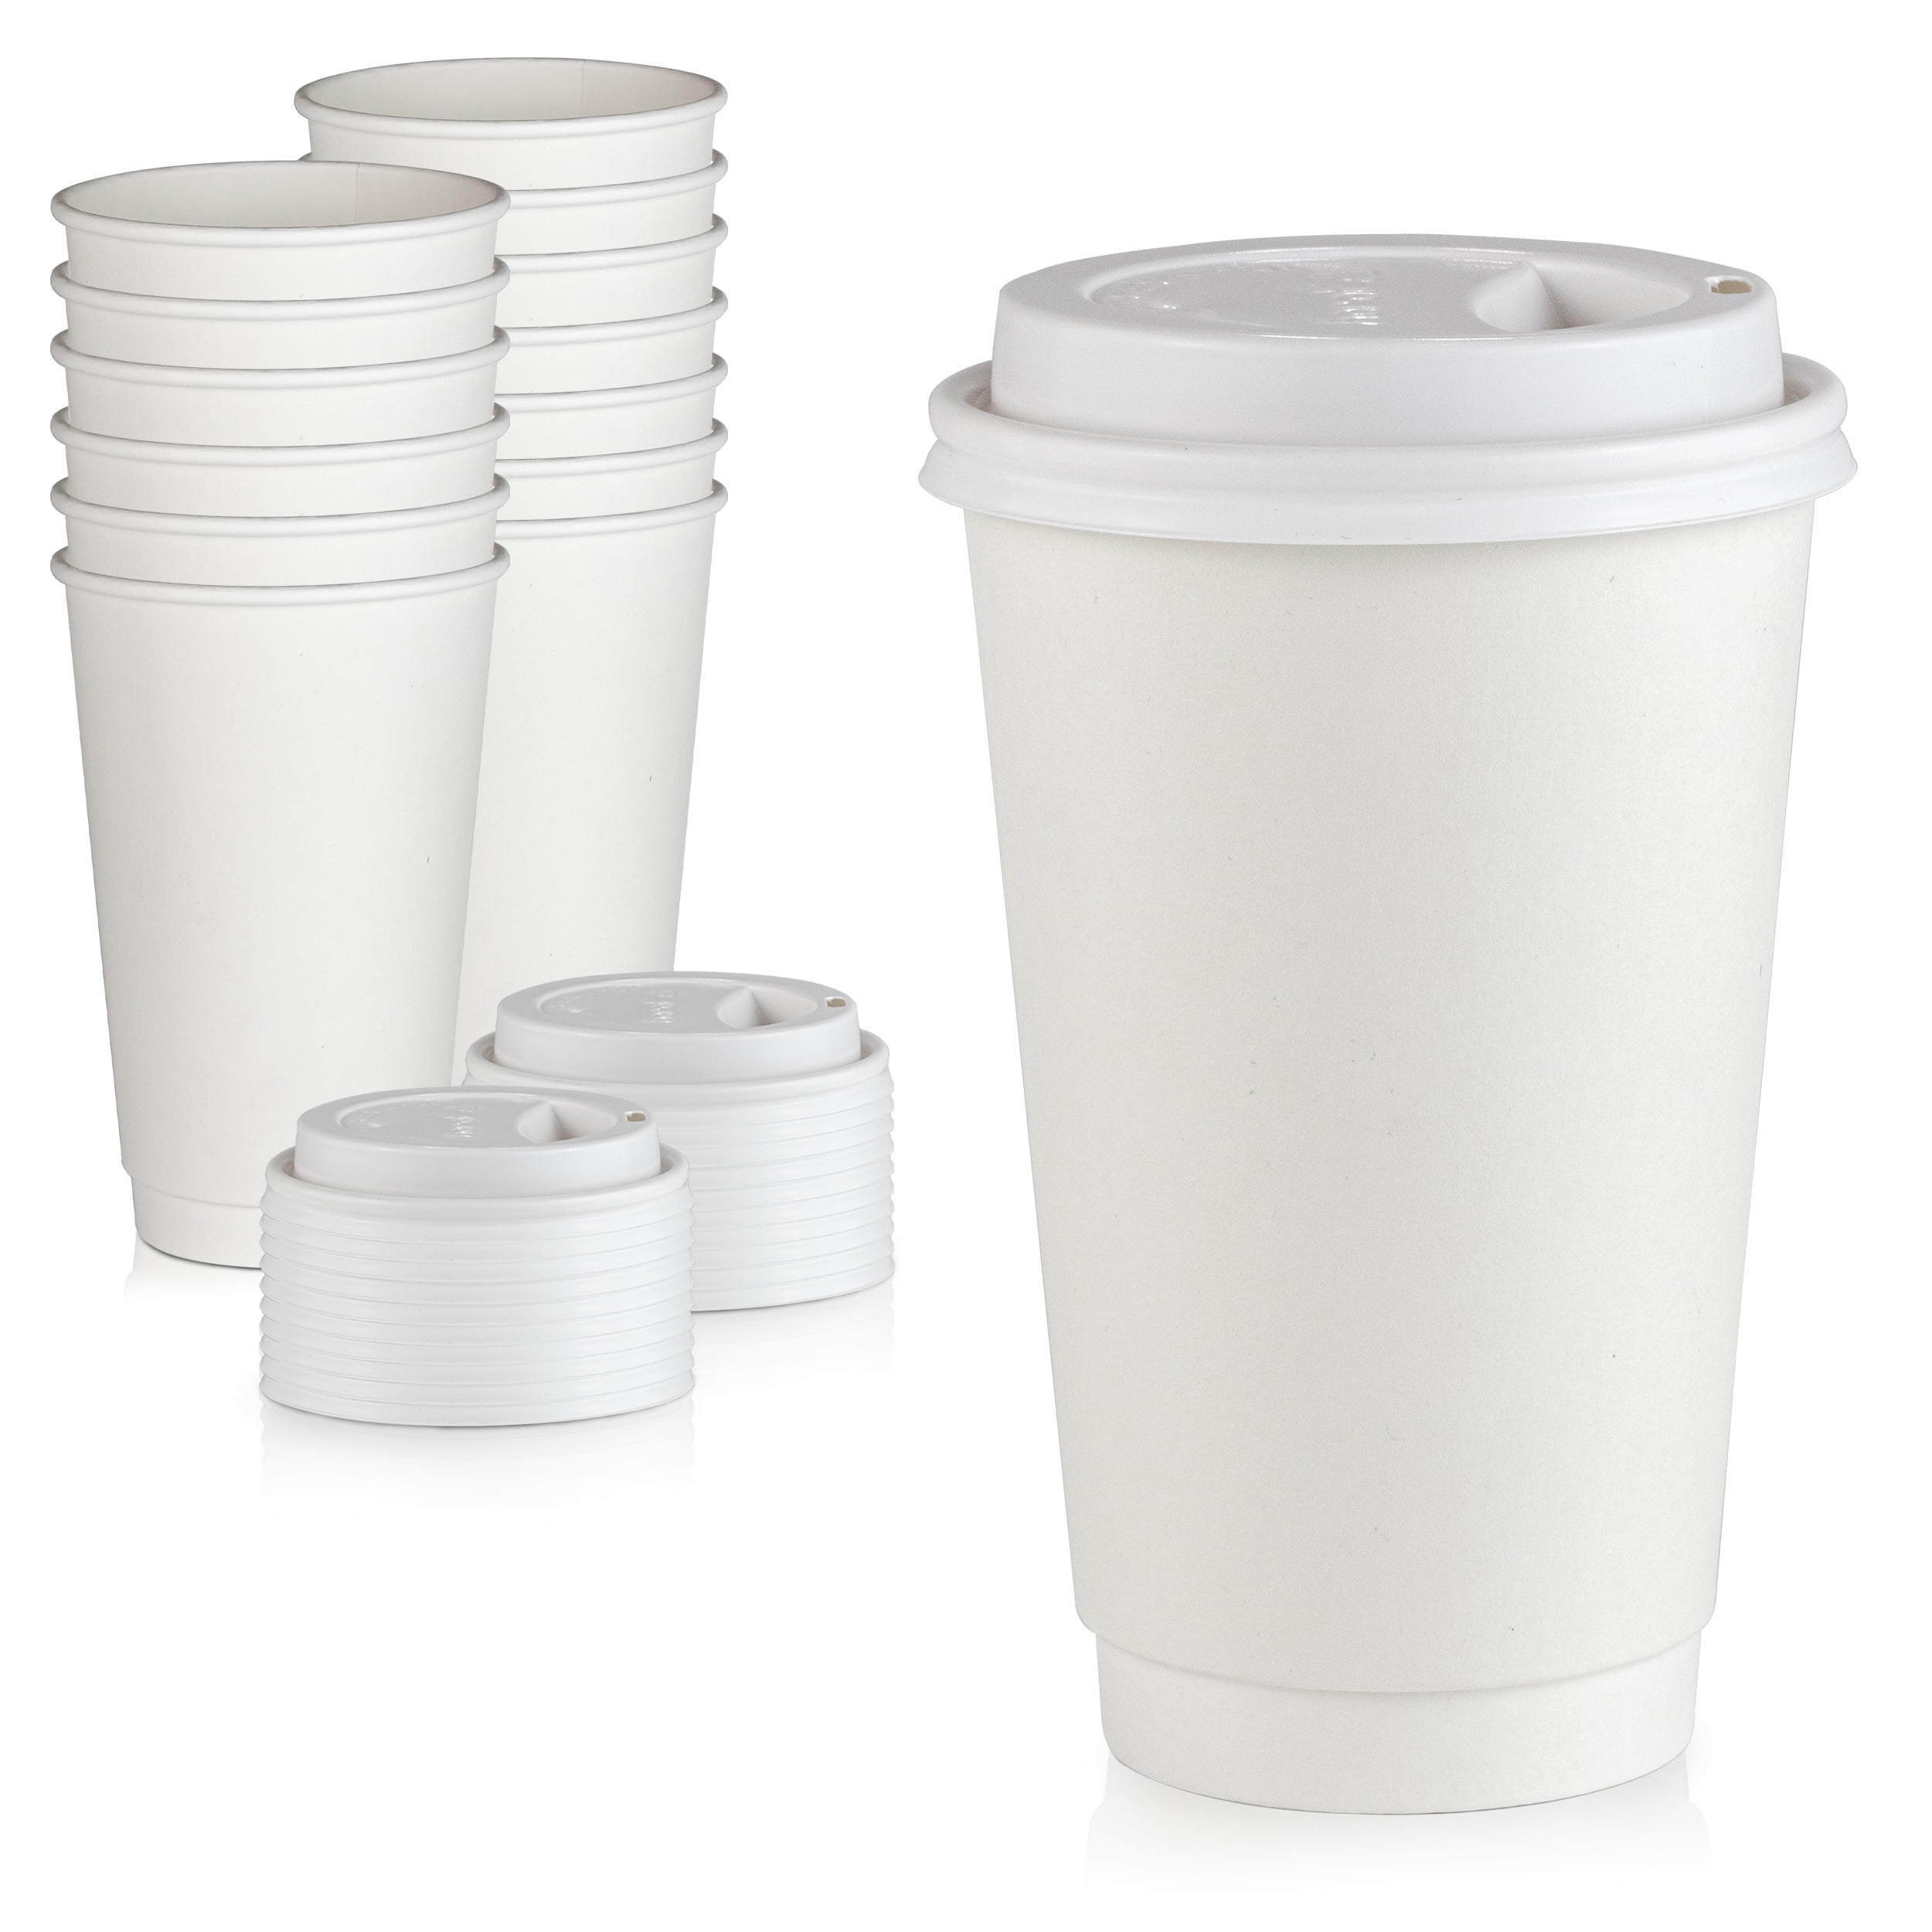 50 Pack] Disposable Coffee Cups with Lids - 16 oz White Double